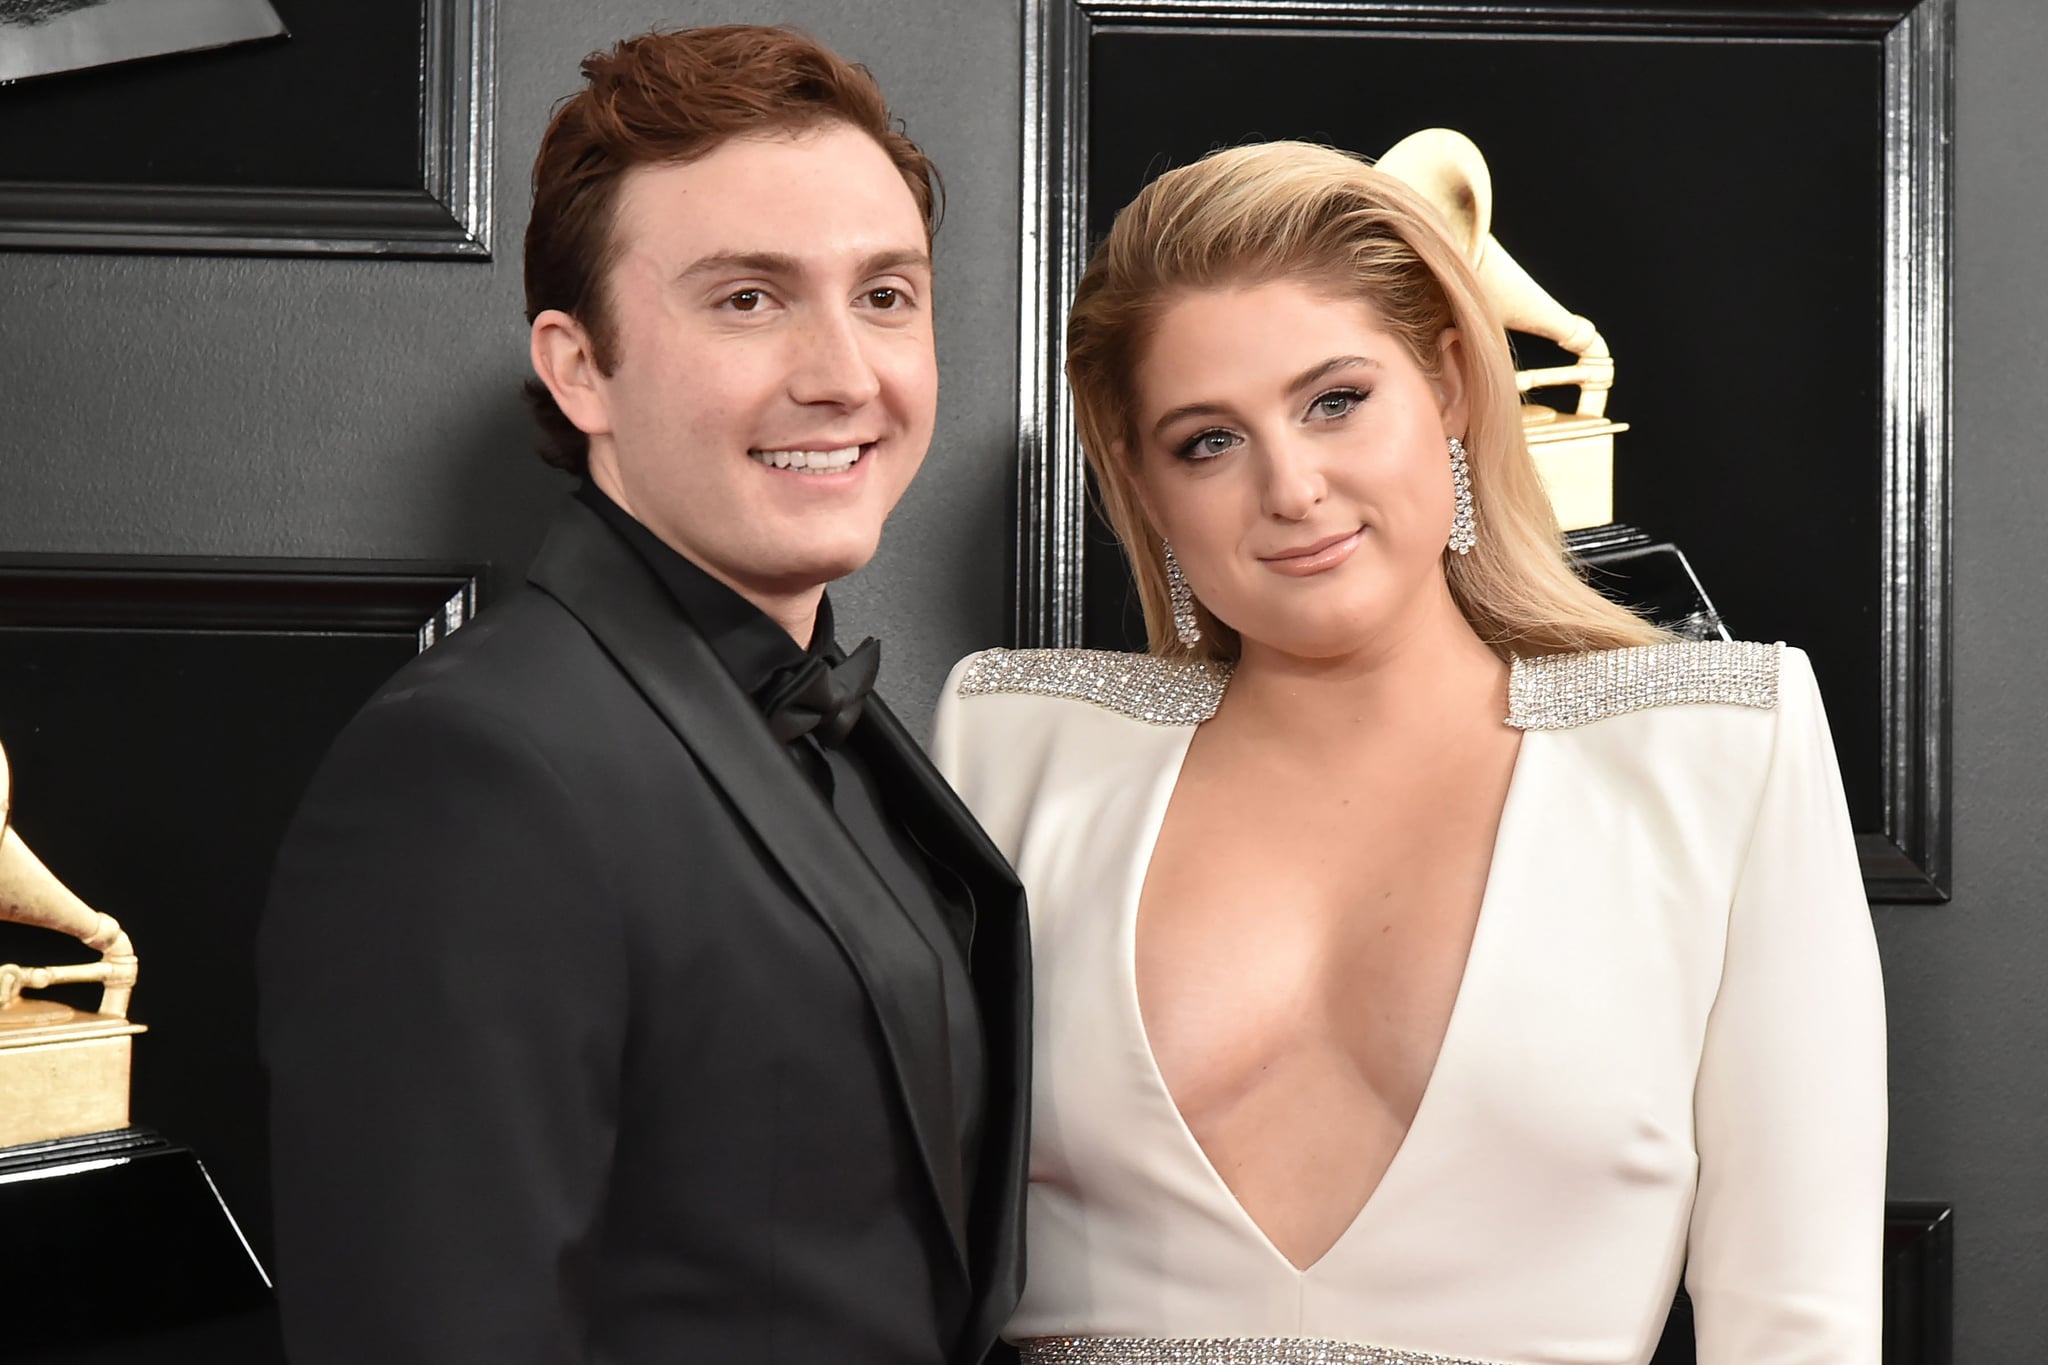 LOS ANGELES, CALIFORNIA - FEBRUARY 10: Daryl Sabara and Meghan Trainor attend the 61st Annual Grammy Awards at Staples Centre on February 10, 2019 in Los Angeles, California. (Photo by David Crotty/Patrick McMullan via Getty Images)